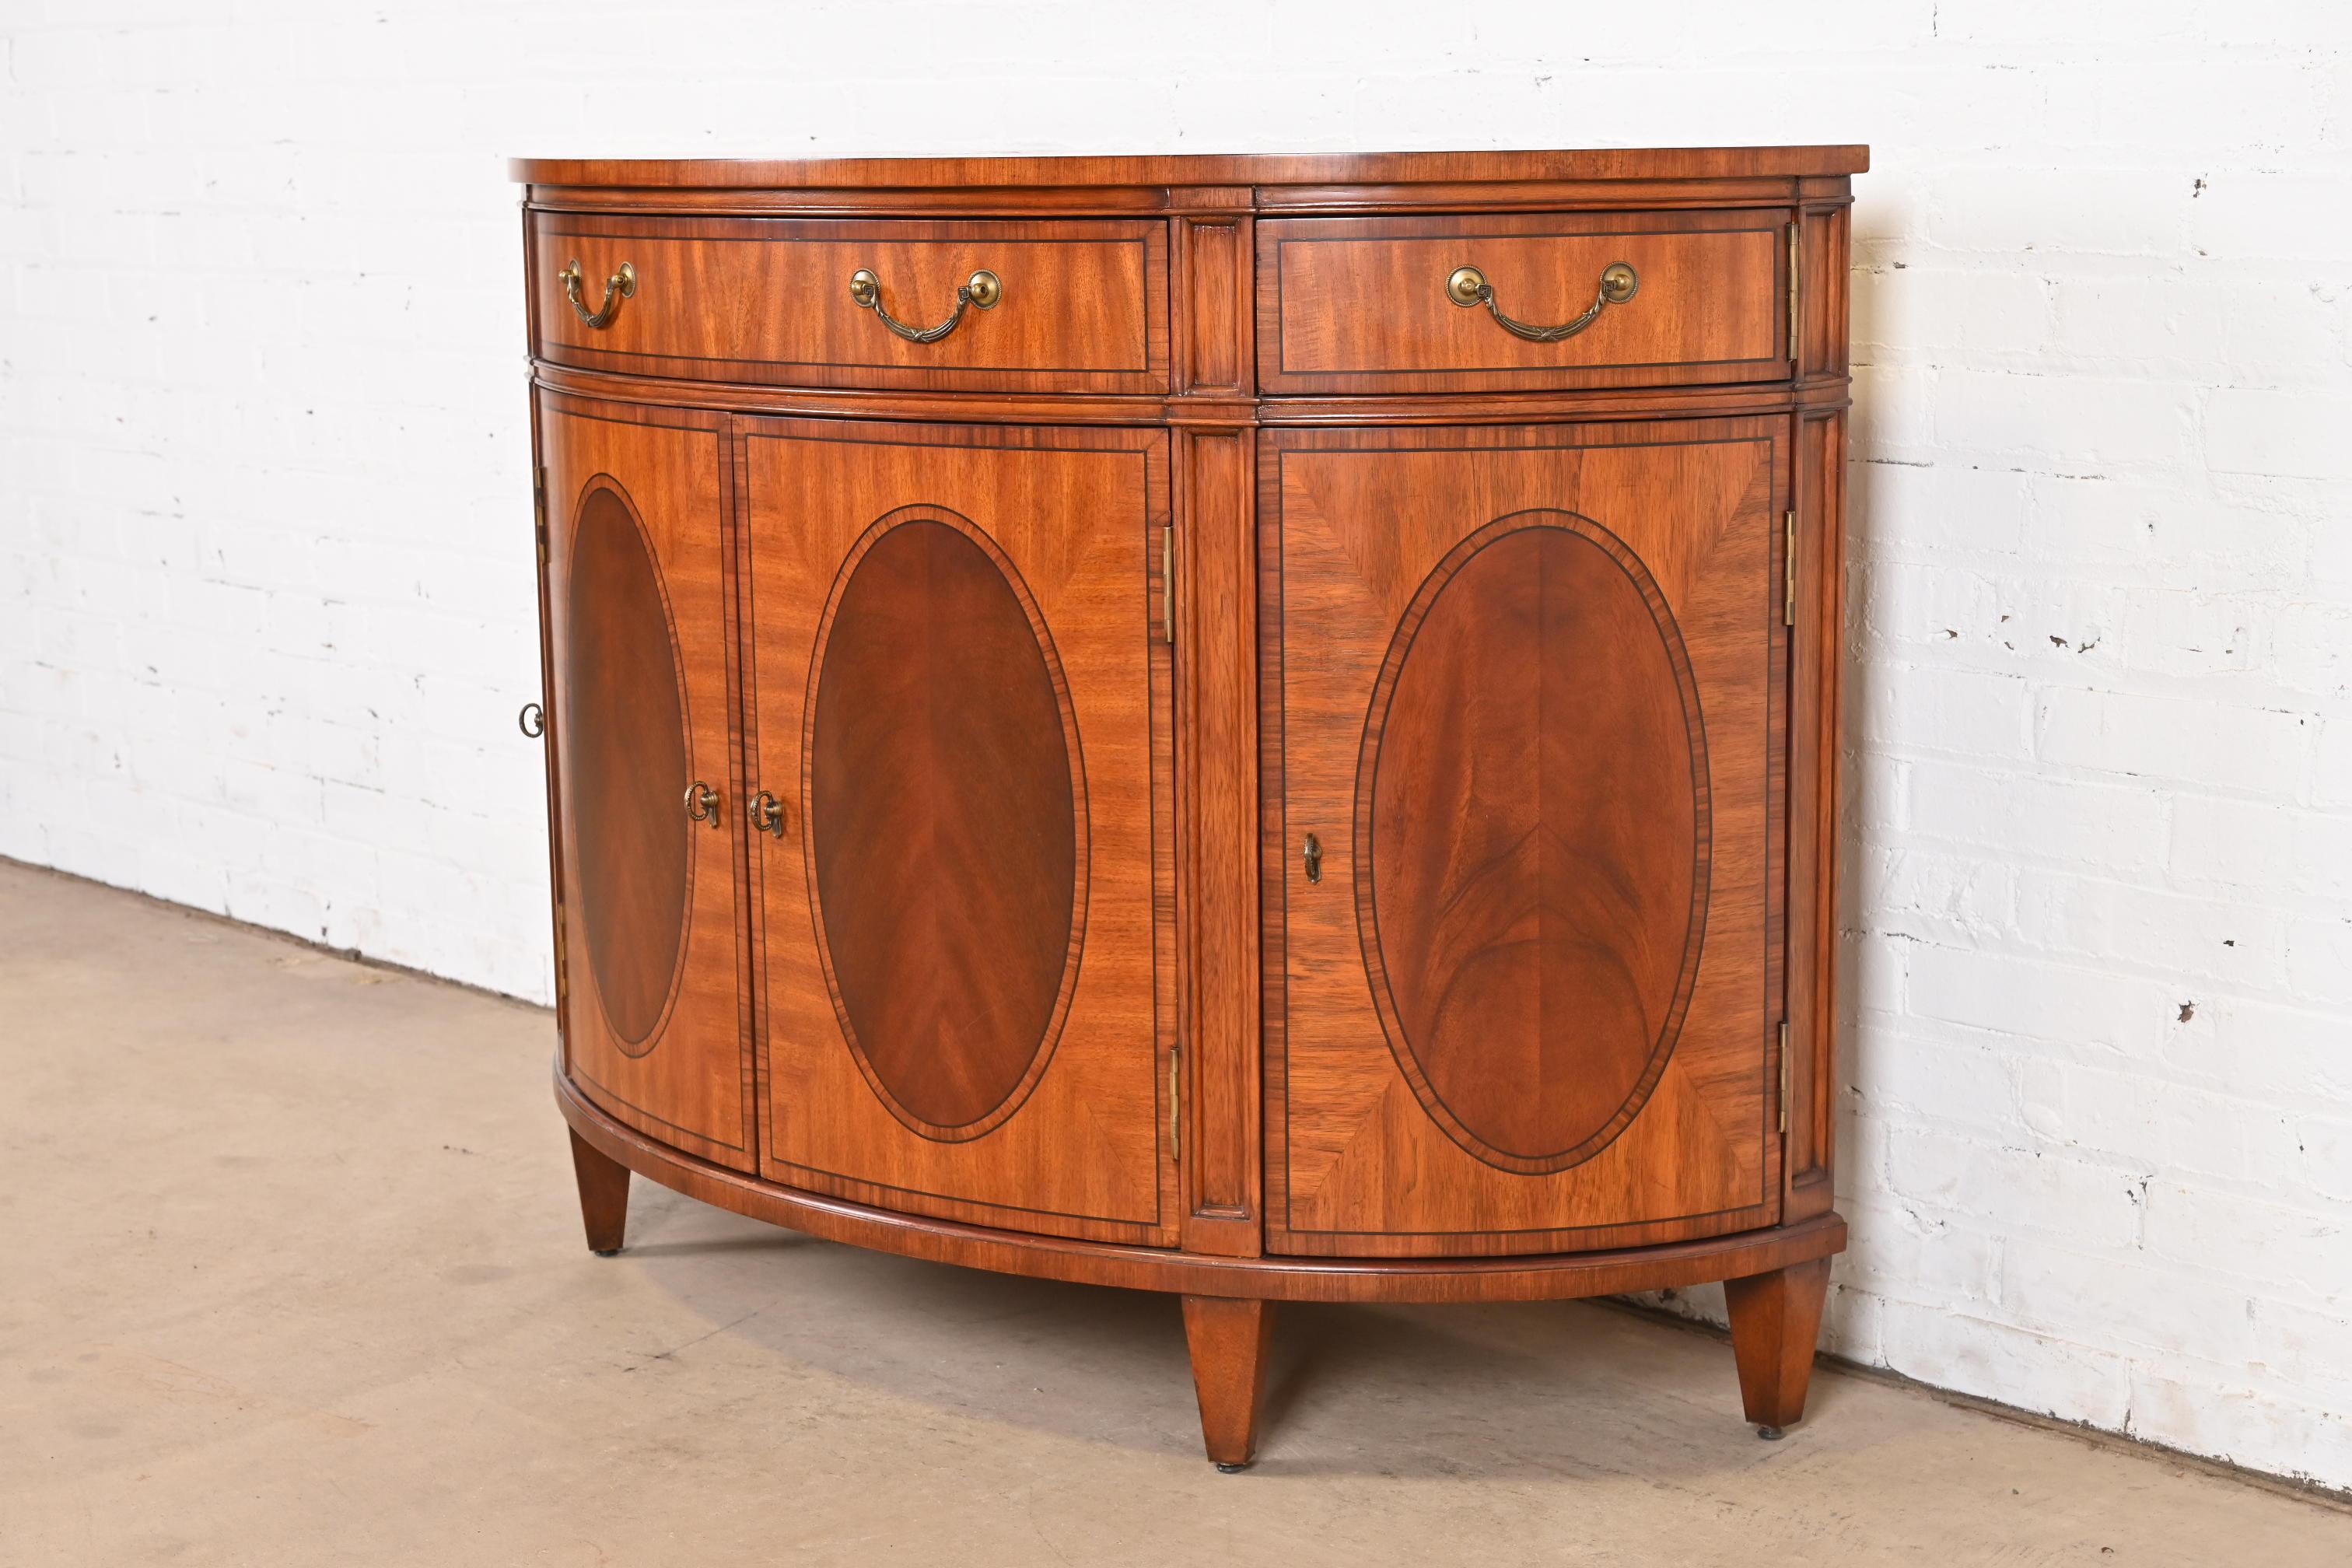 Regency Inlaid Mahogany Demilune Sideboard or Bar Cabinet In Good Condition For Sale In South Bend, IN